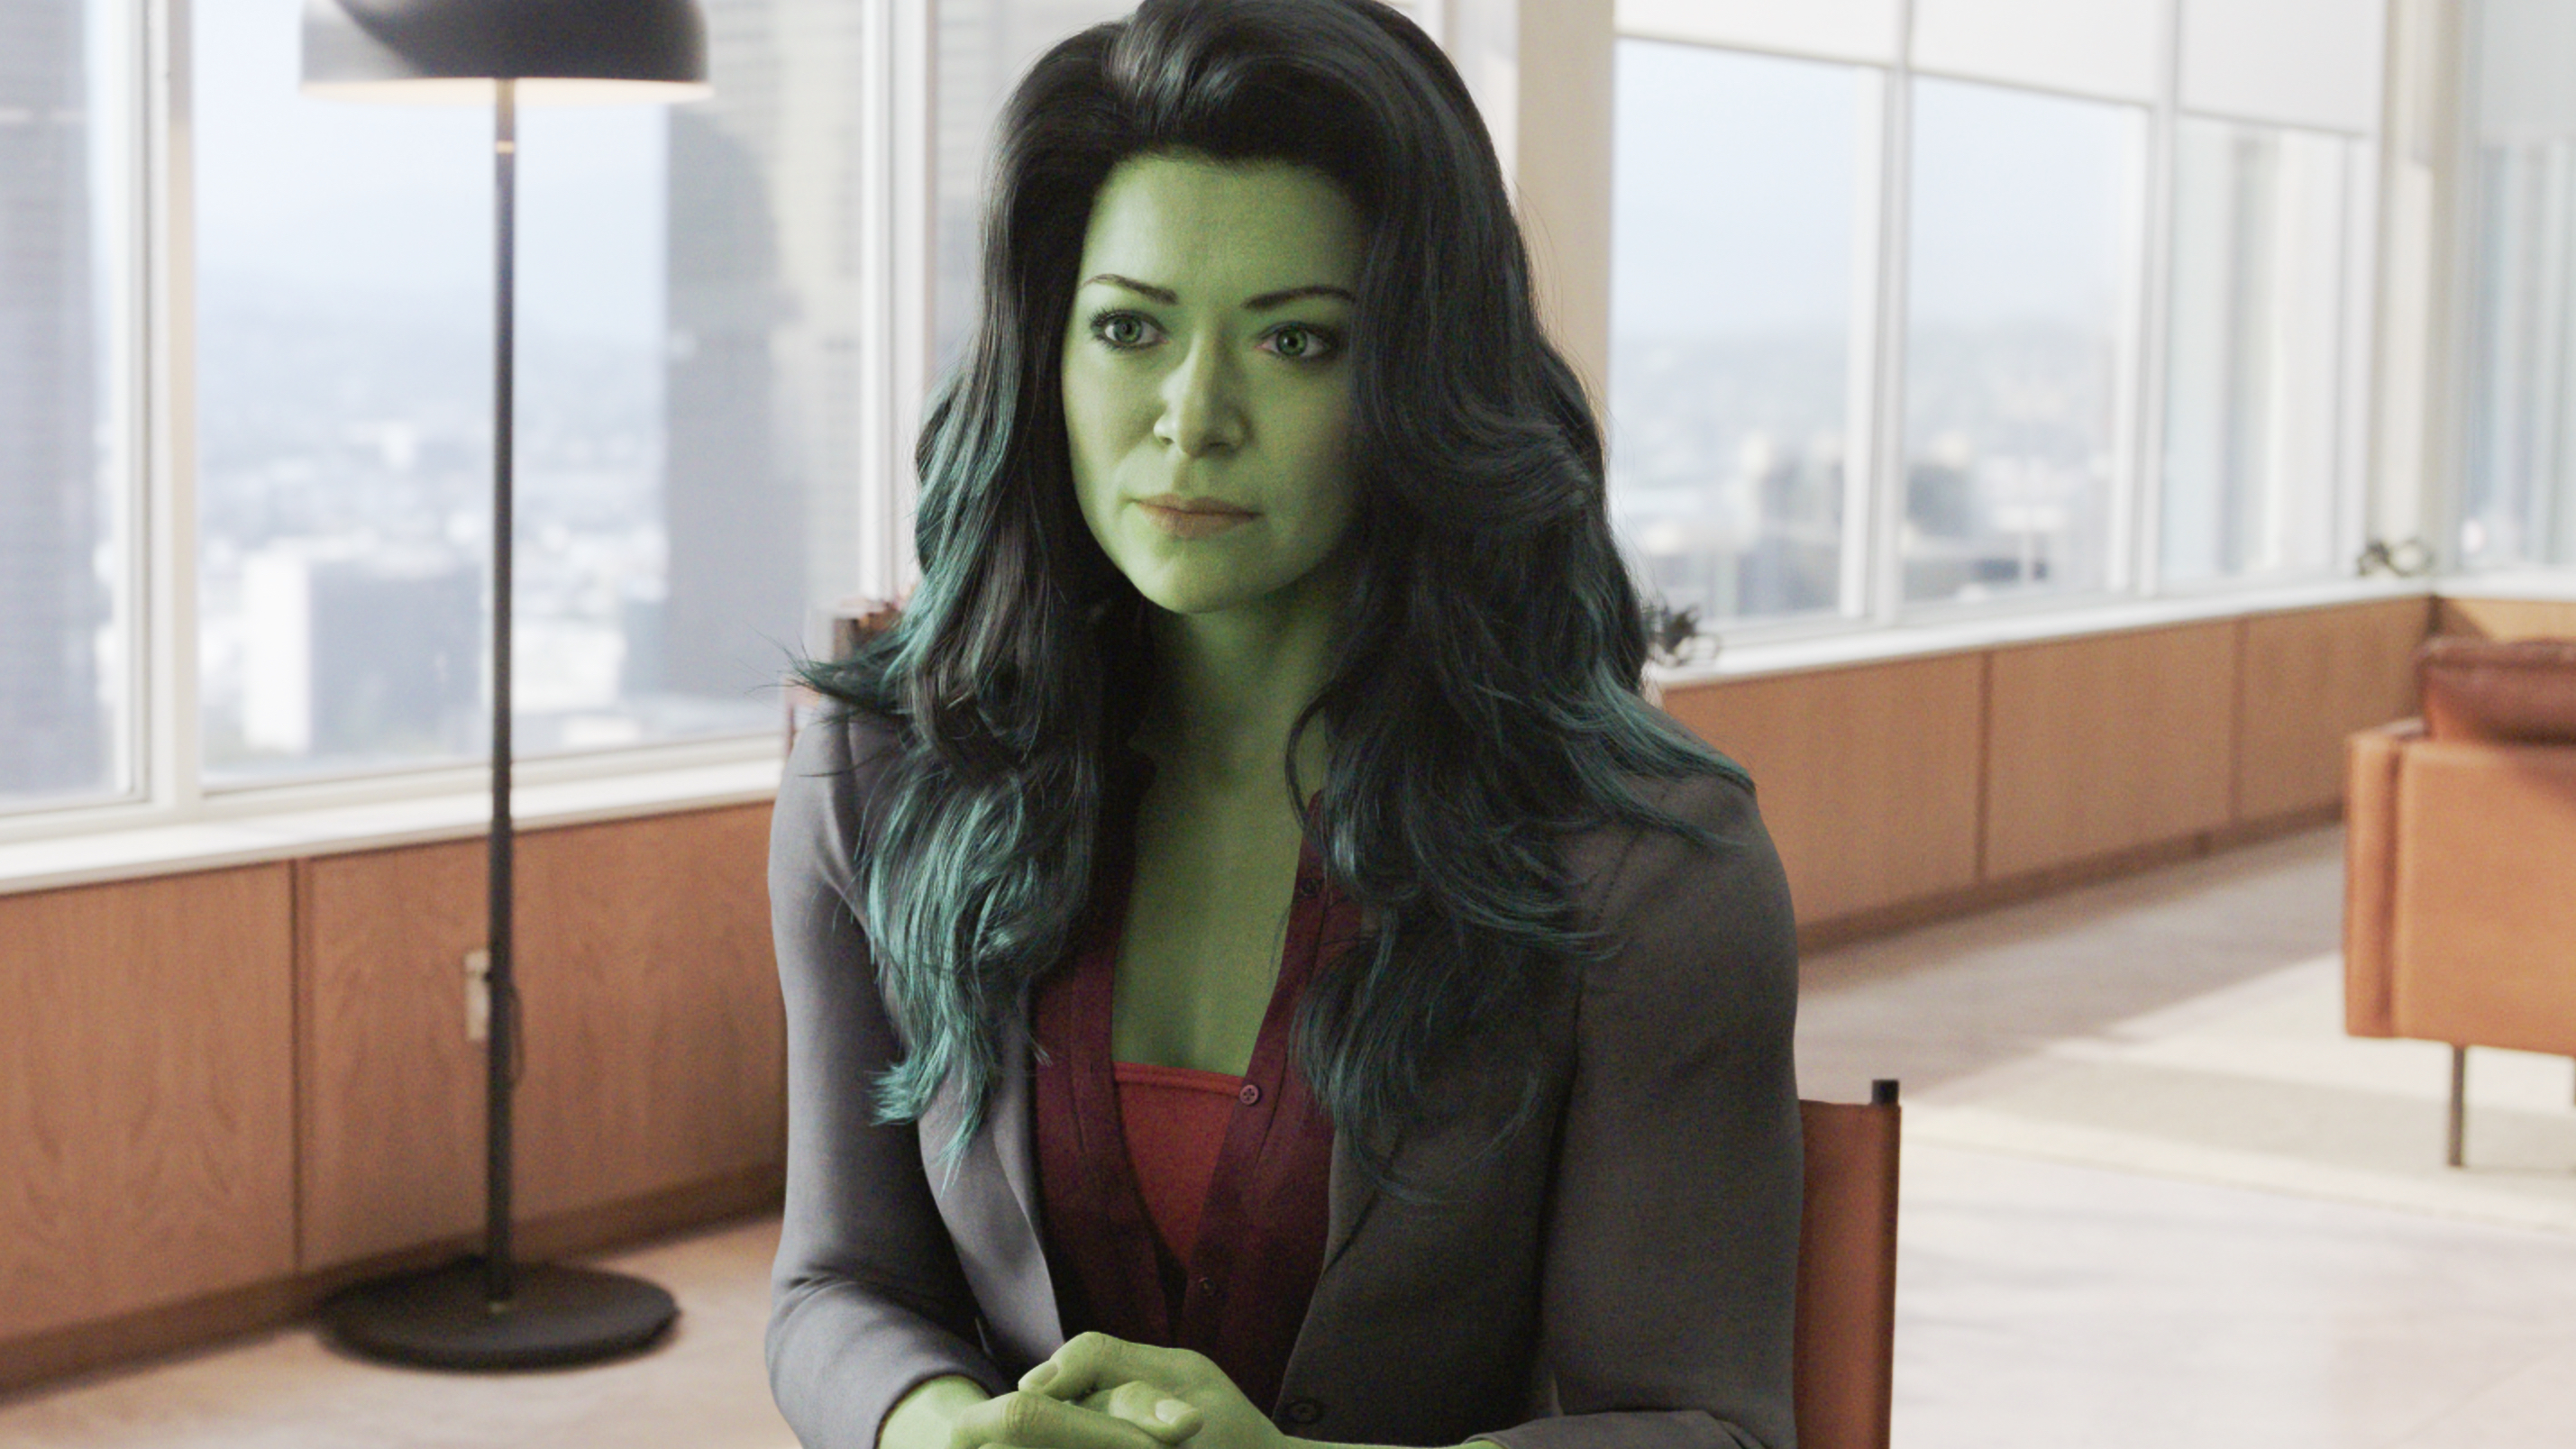 She-Hulk TV Clip  She-Hulk and Daredevil face off in this week's